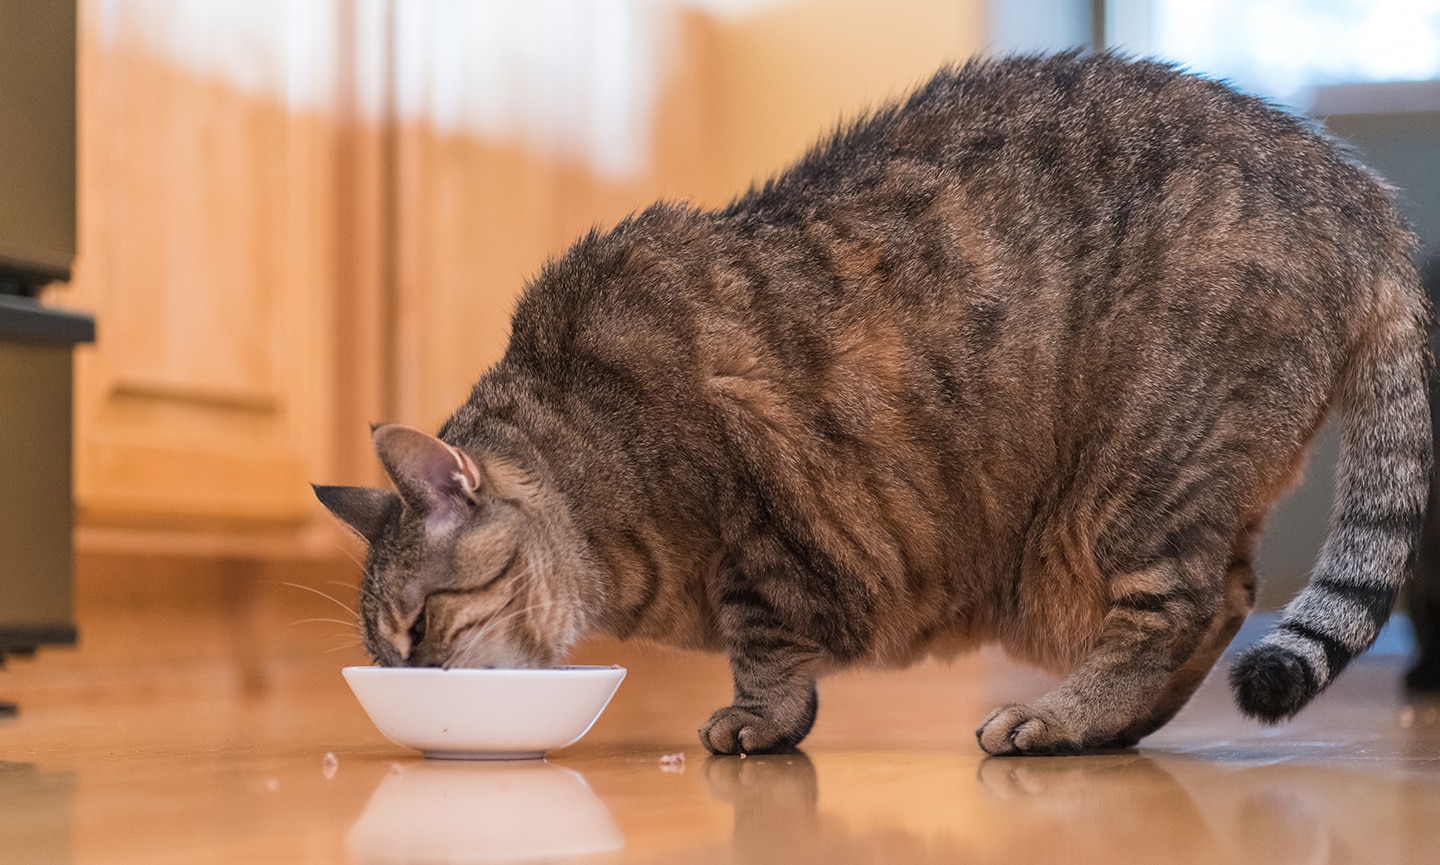 Your Cat's Weight: A Hands On Guide for Pet Parents